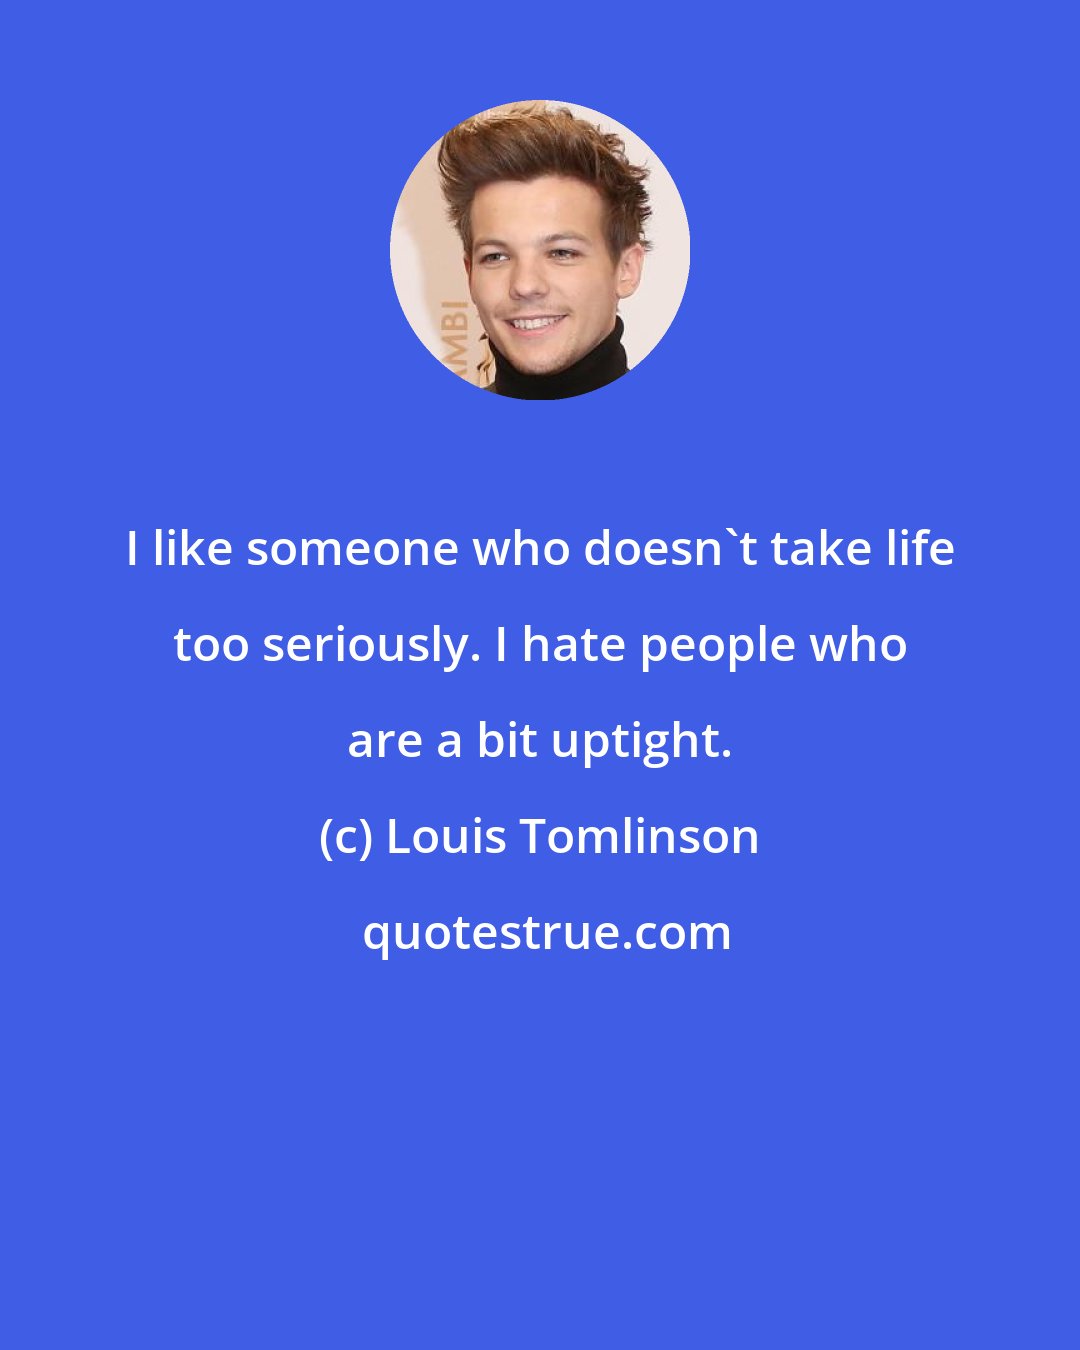 Louis Tomlinson: I like someone who doesn't take life too seriously. I hate people who are a bit uptight.